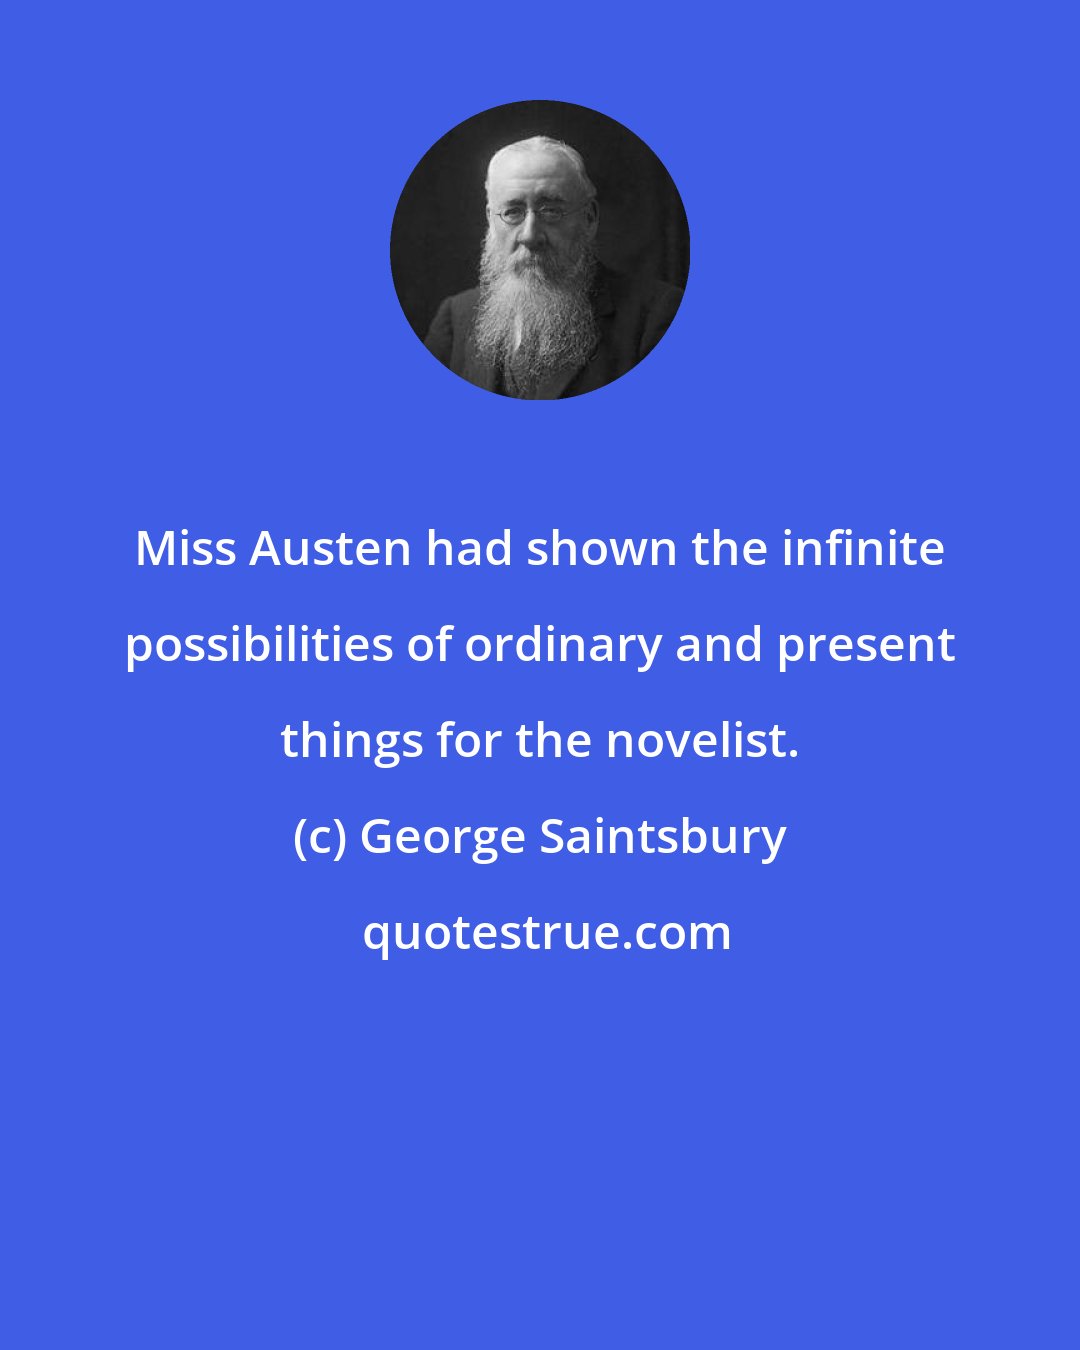 George Saintsbury: Miss Austen had shown the infinite possibilities of ordinary and present things for the novelist.